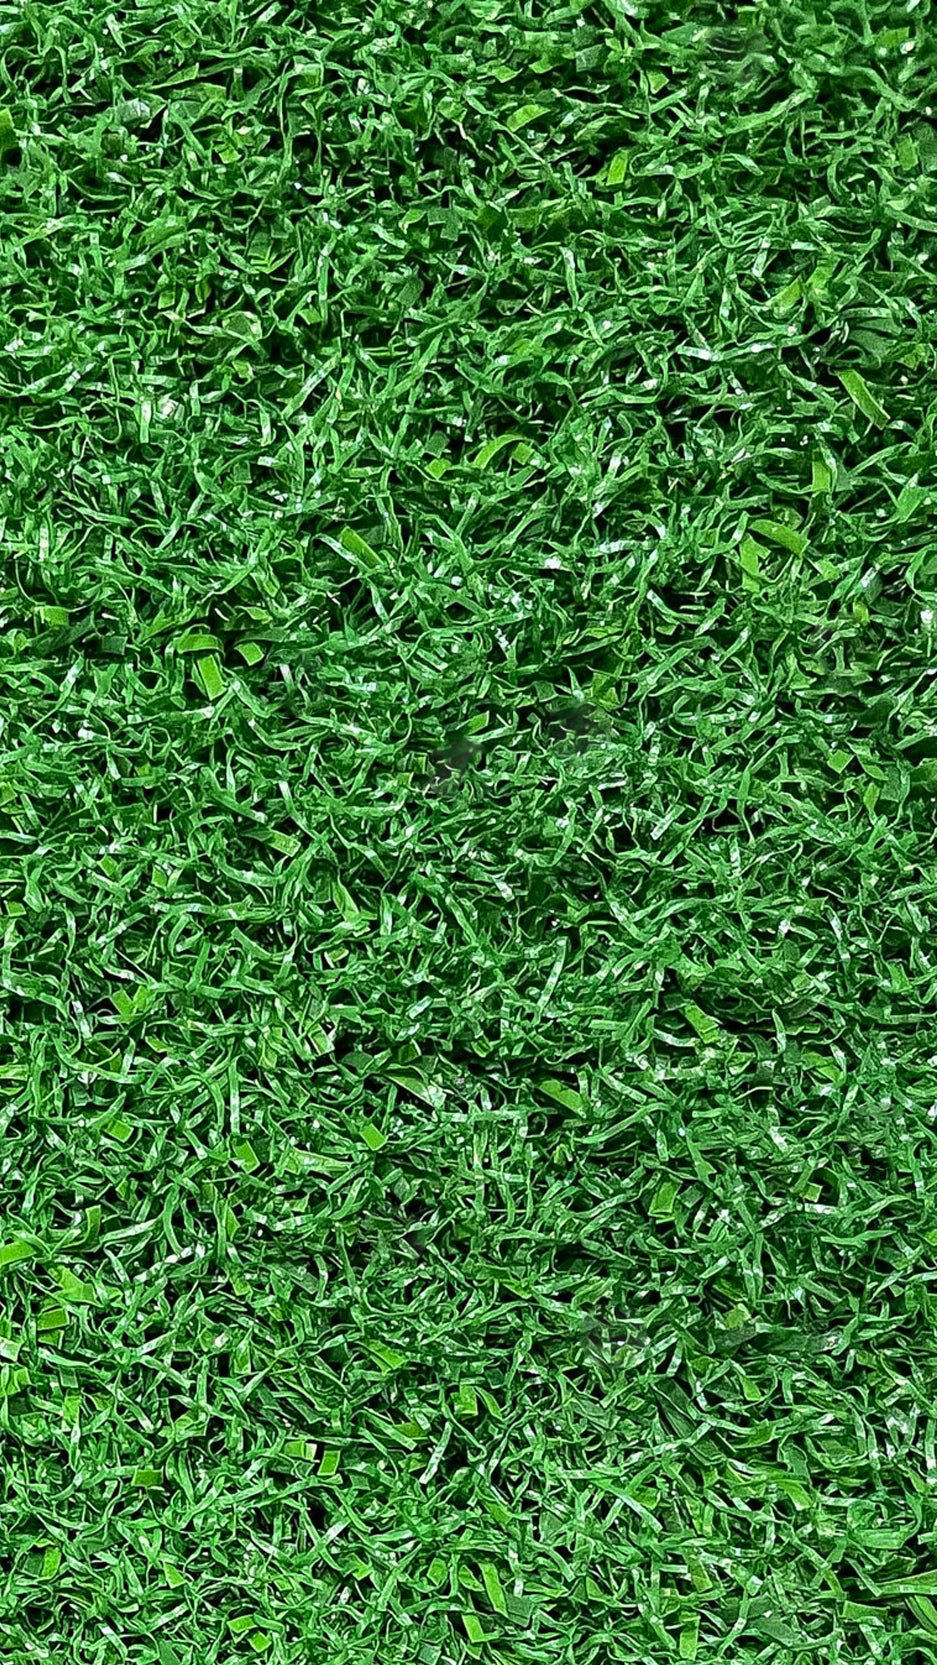 20 MM Garden Artificial Grass for Indoor and Outdoor Use, Soft and Lush Natural Looking - V Surfaces